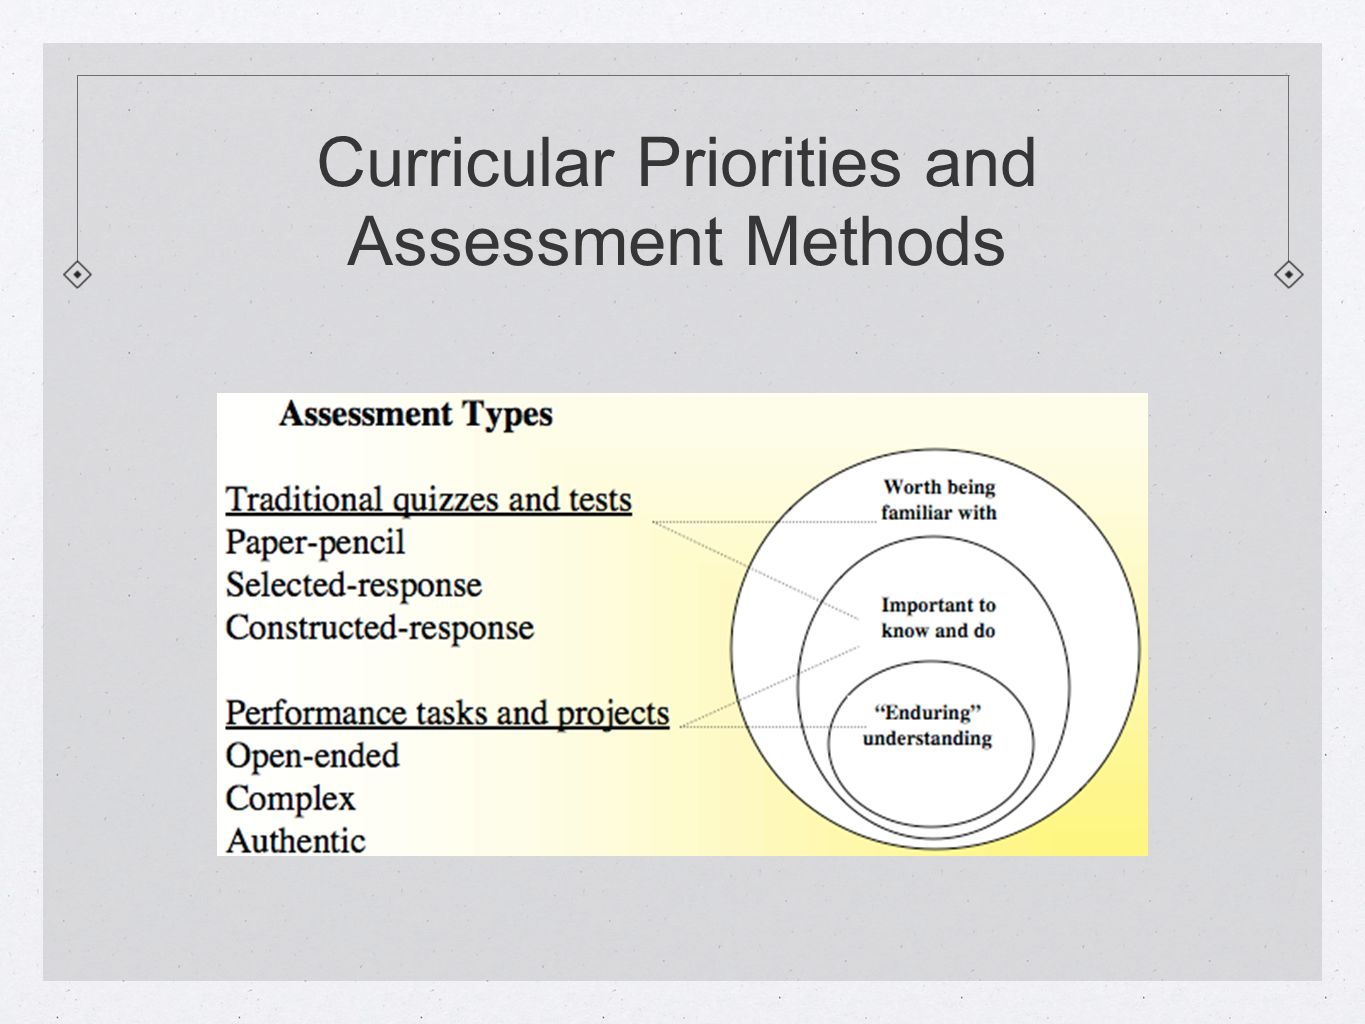 Curricular Priorities and Assessment Methods